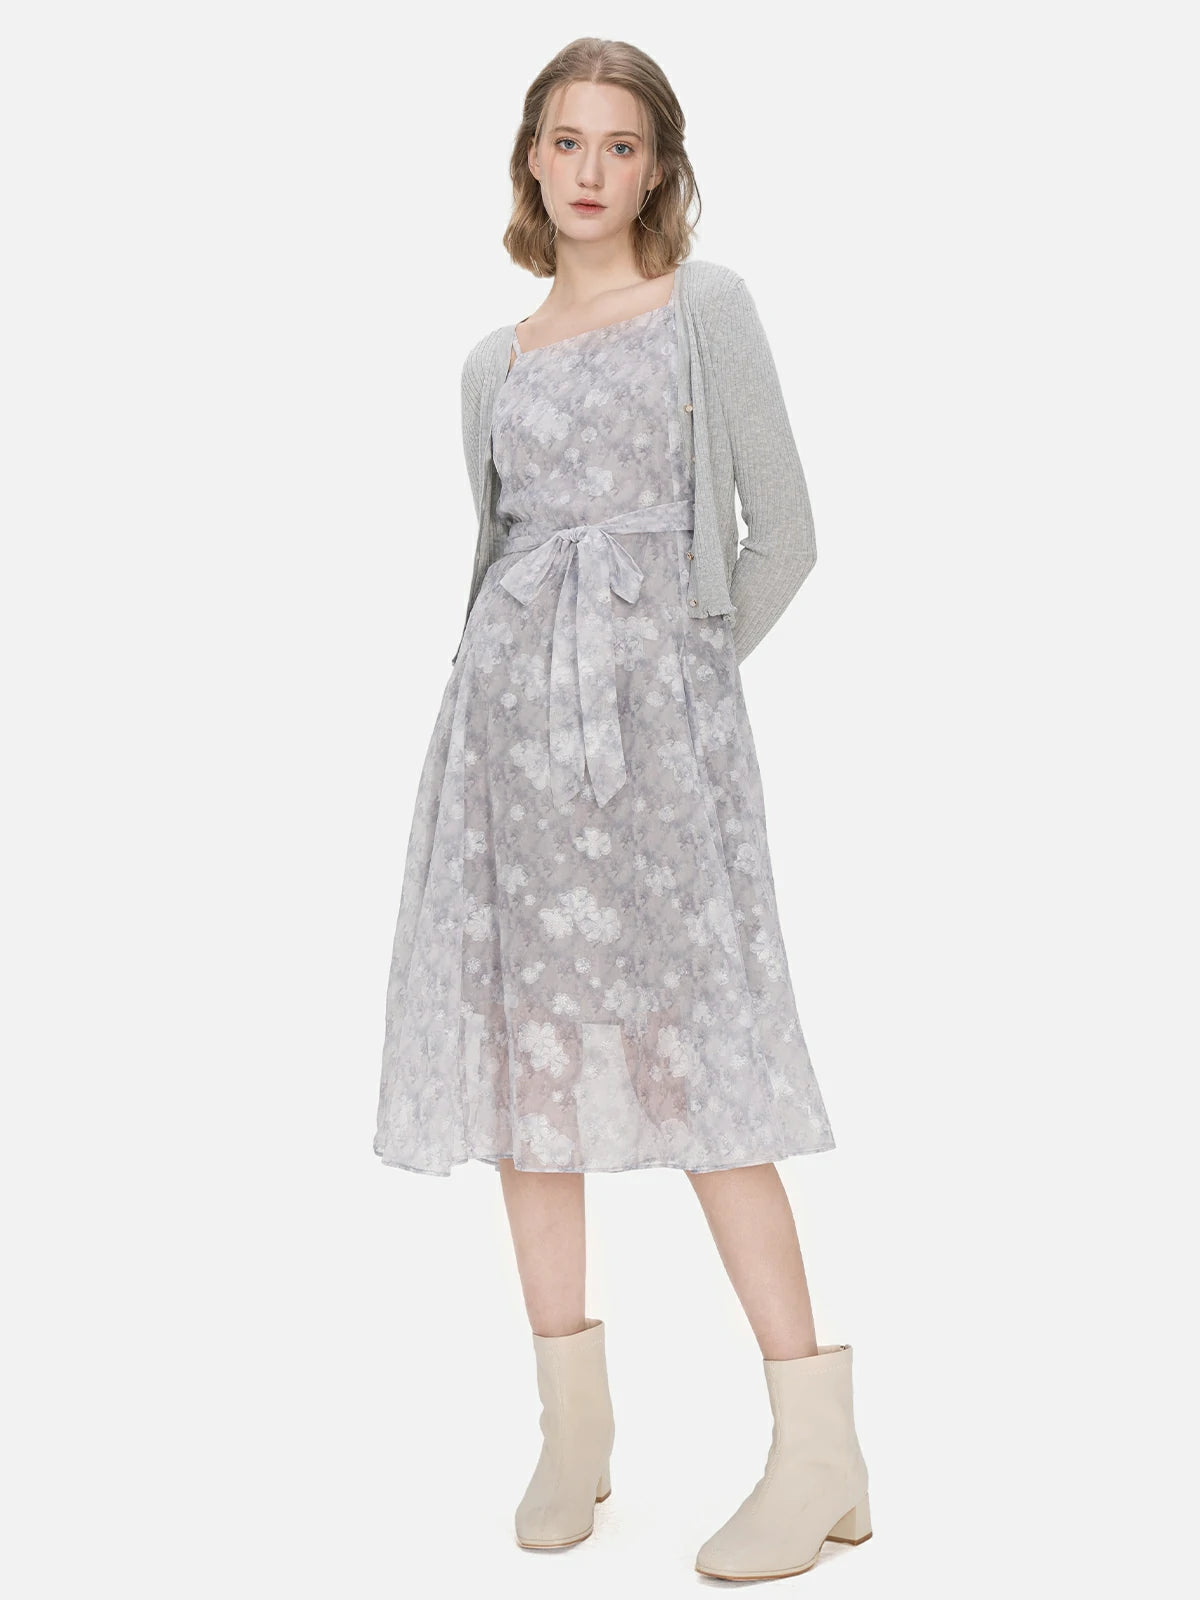 Step into the spotlight with this versatile two-piece set, featuring a V-neck knit cardigan adorned with ruffle hem and buttons, and a spaghetti strap floral chiffon dress.